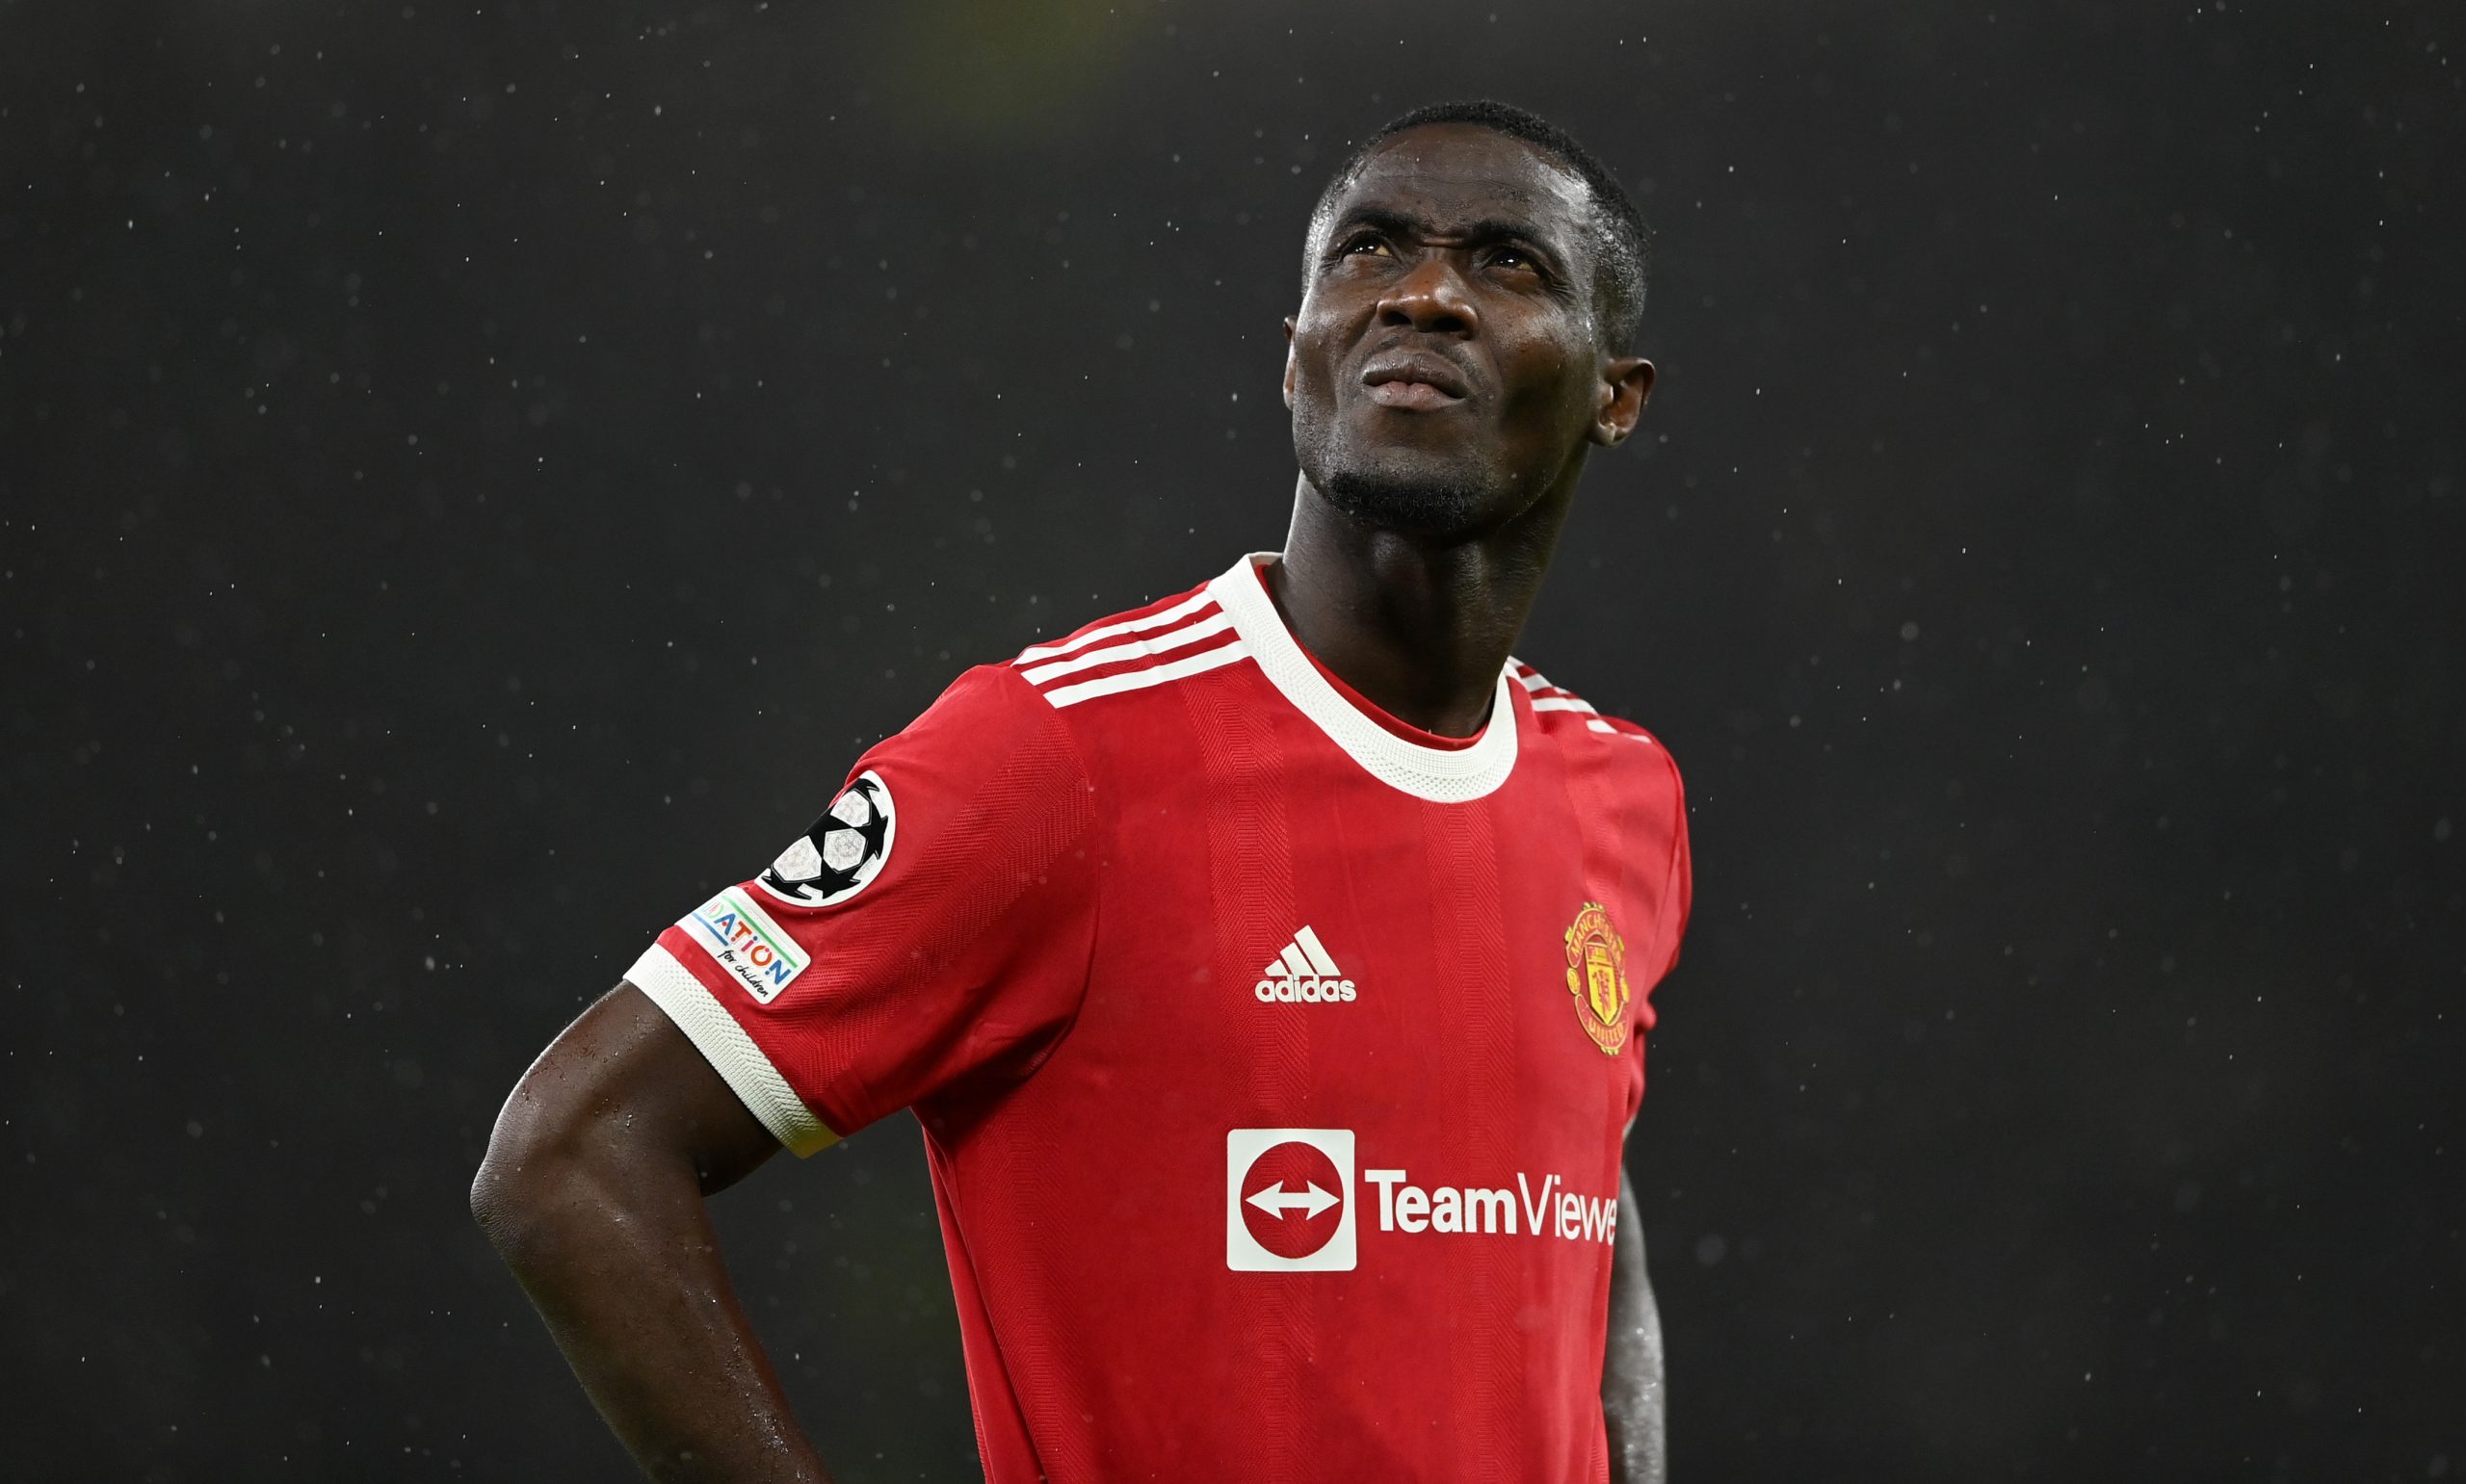 Man United have made the sale of Eric Bailly and Andreas Pereira a priority for this summer. (Photo by Gareth Copley/Getty Images)